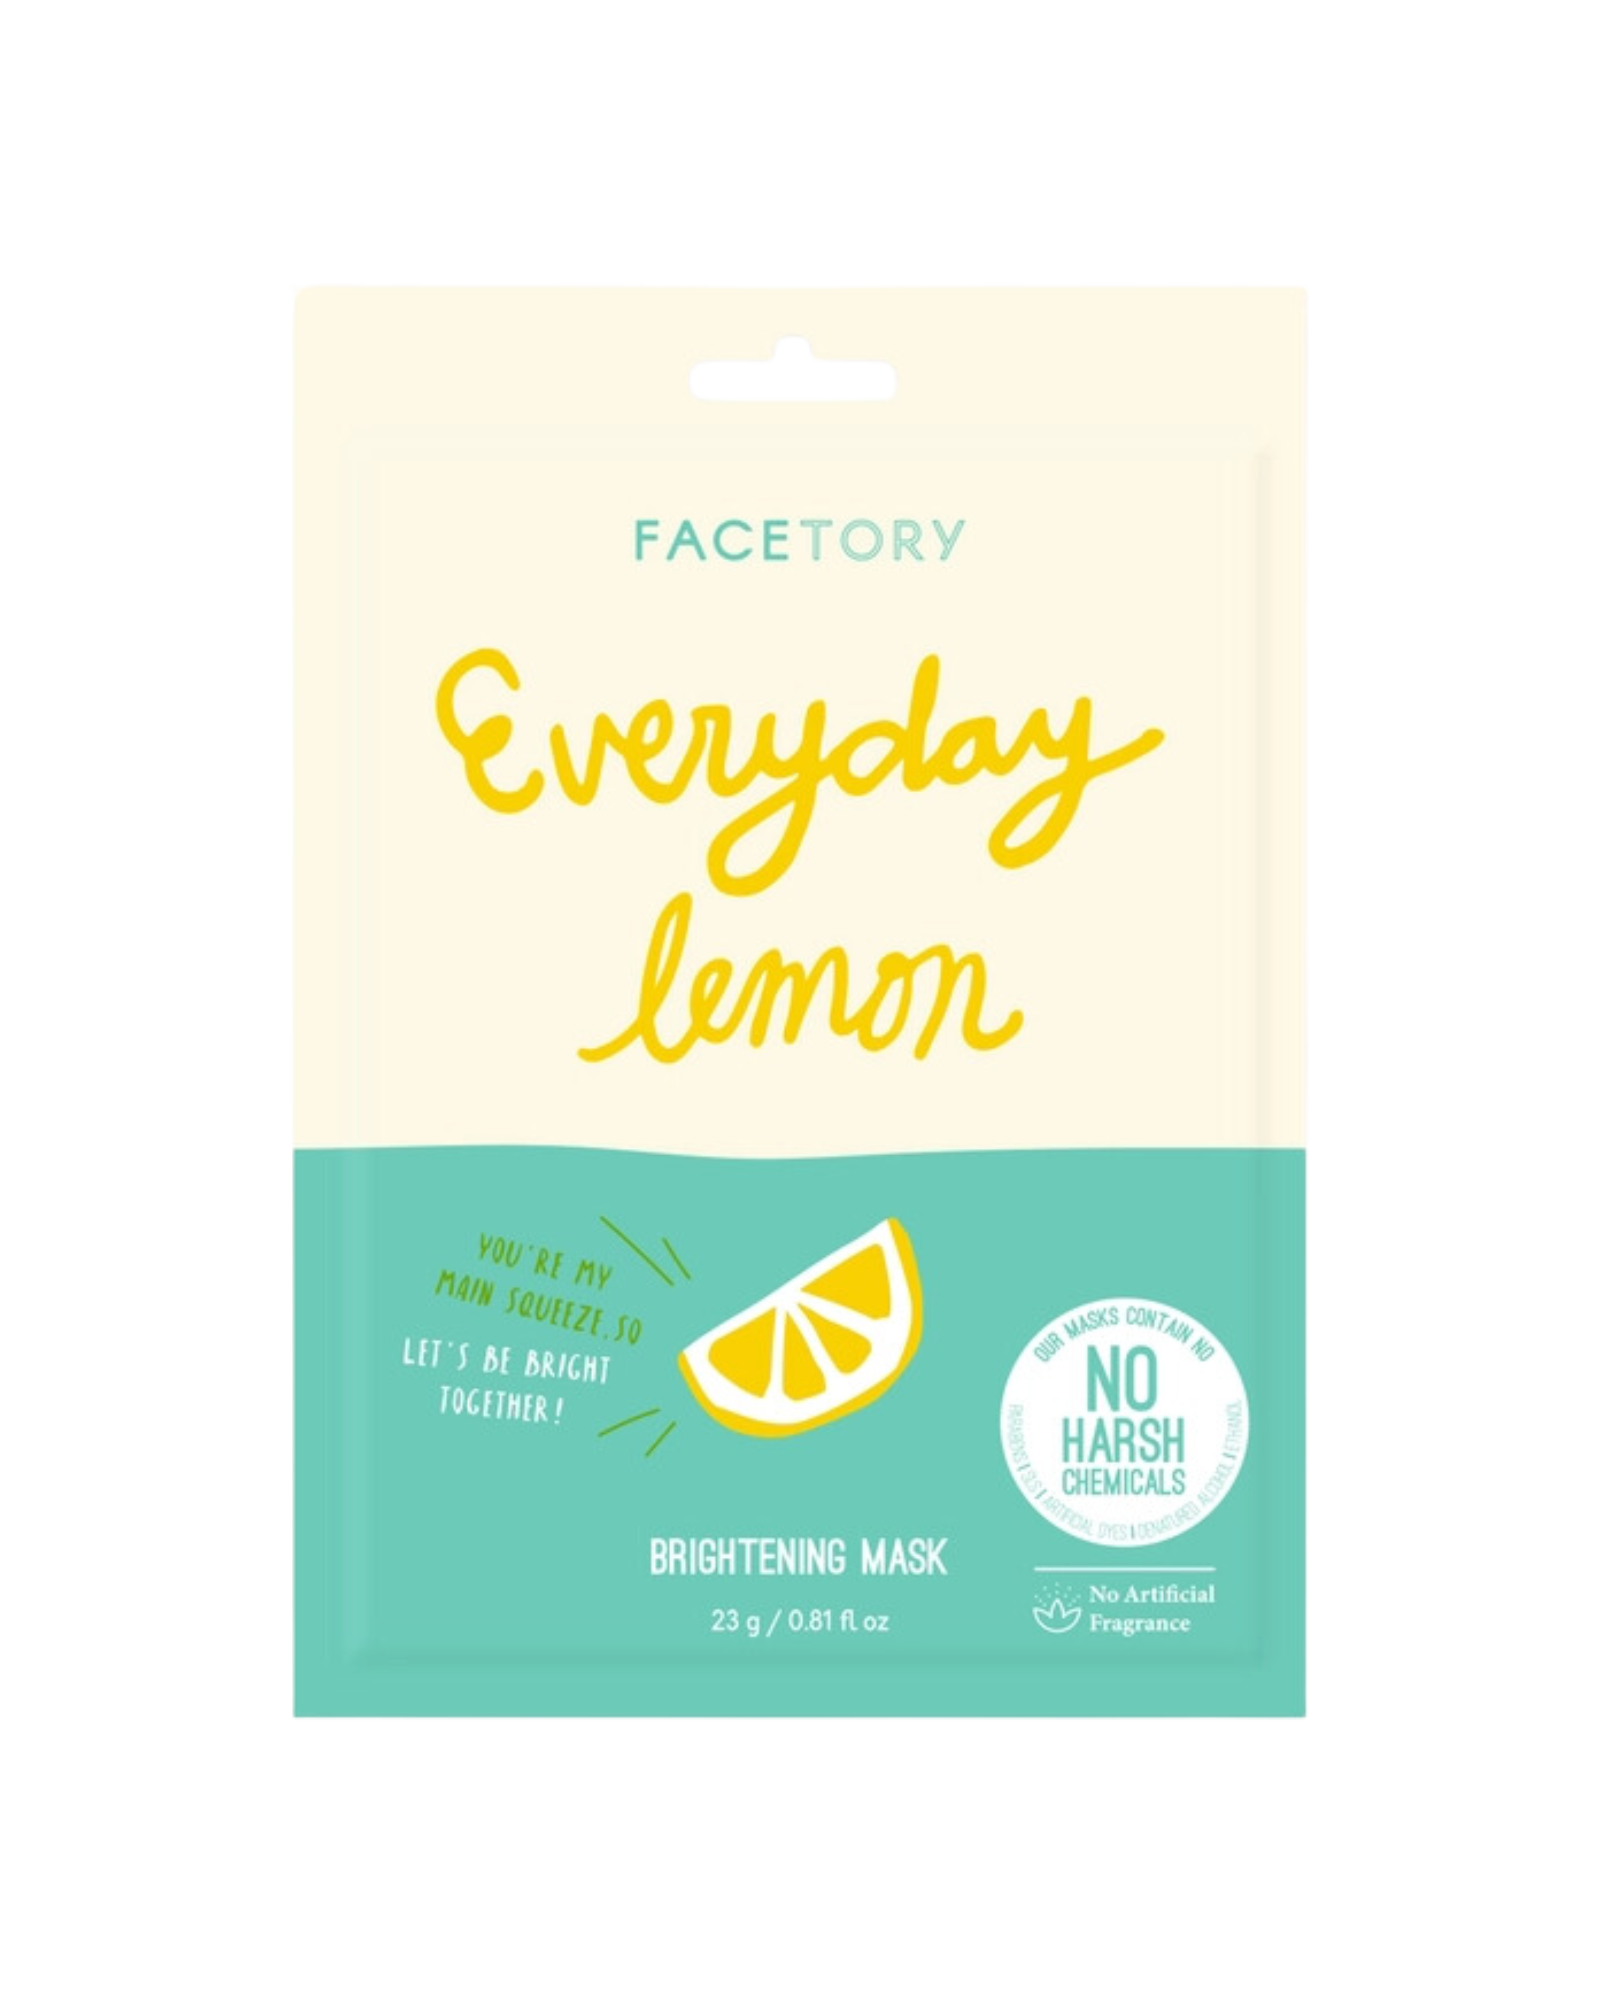 Light yellow and teal face mask packaging